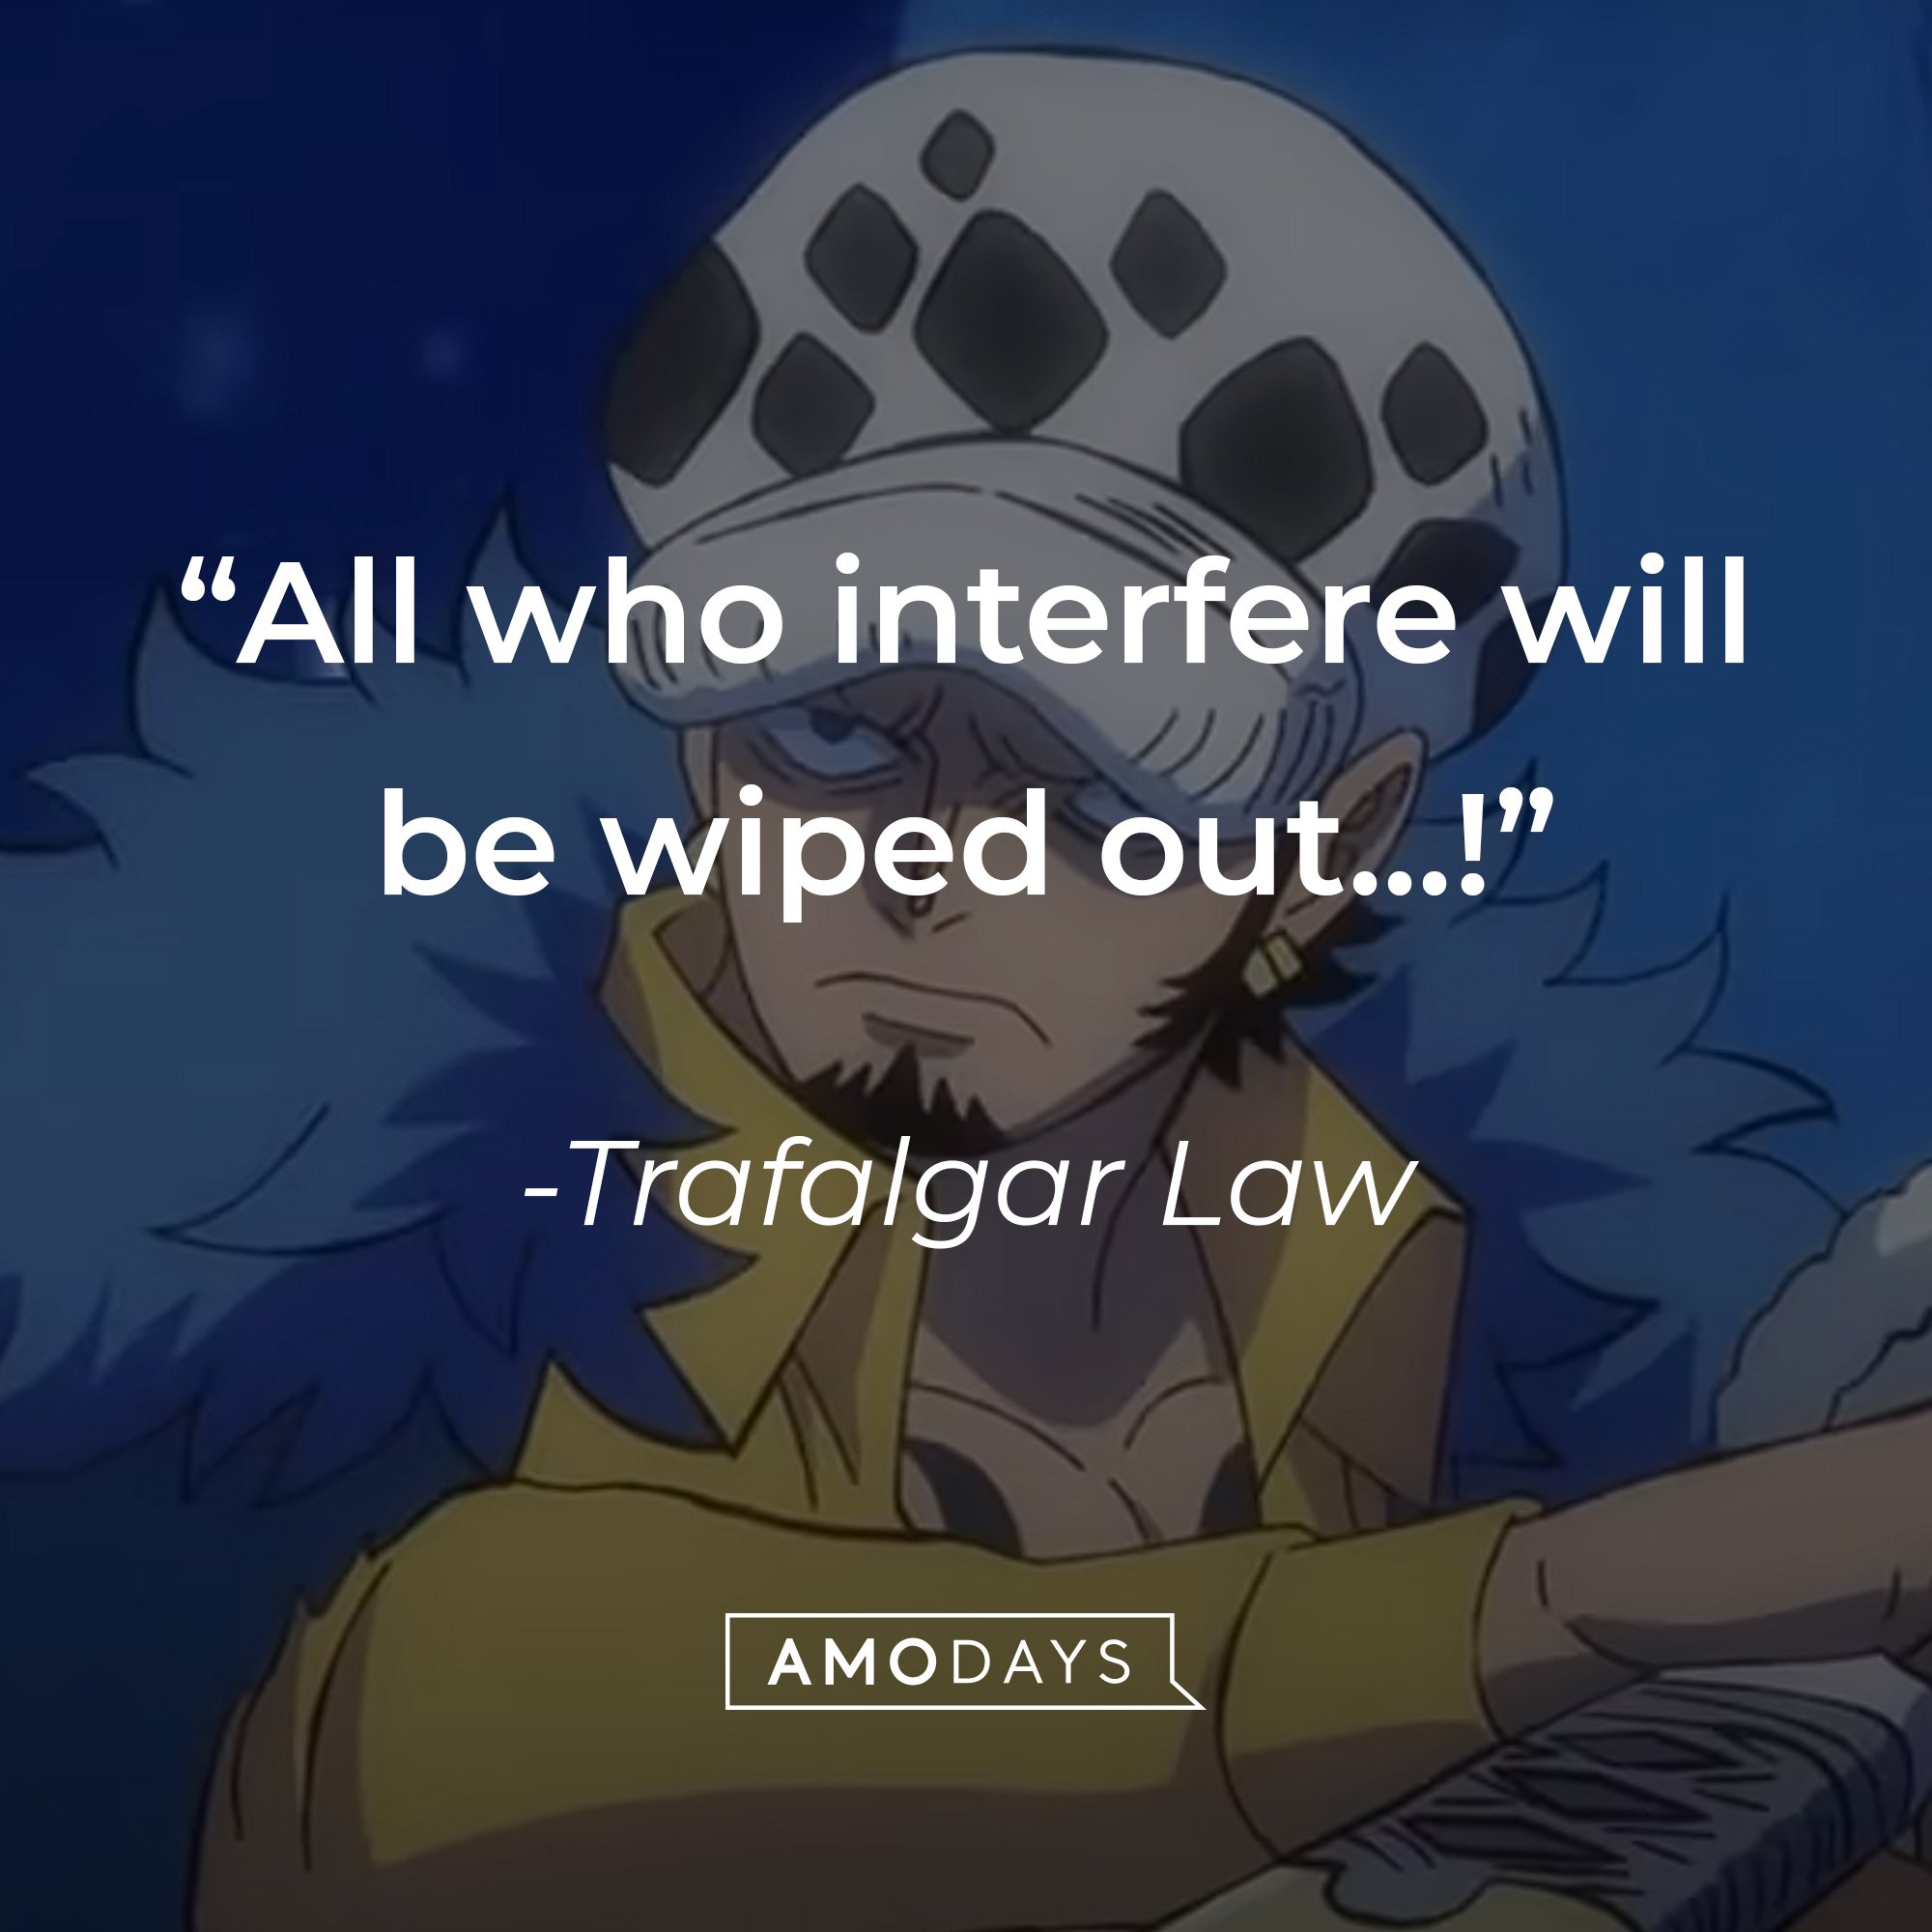 Trafalgar Law’s quote: “All who interfere will be wiped out...!" | Image: AmoDays